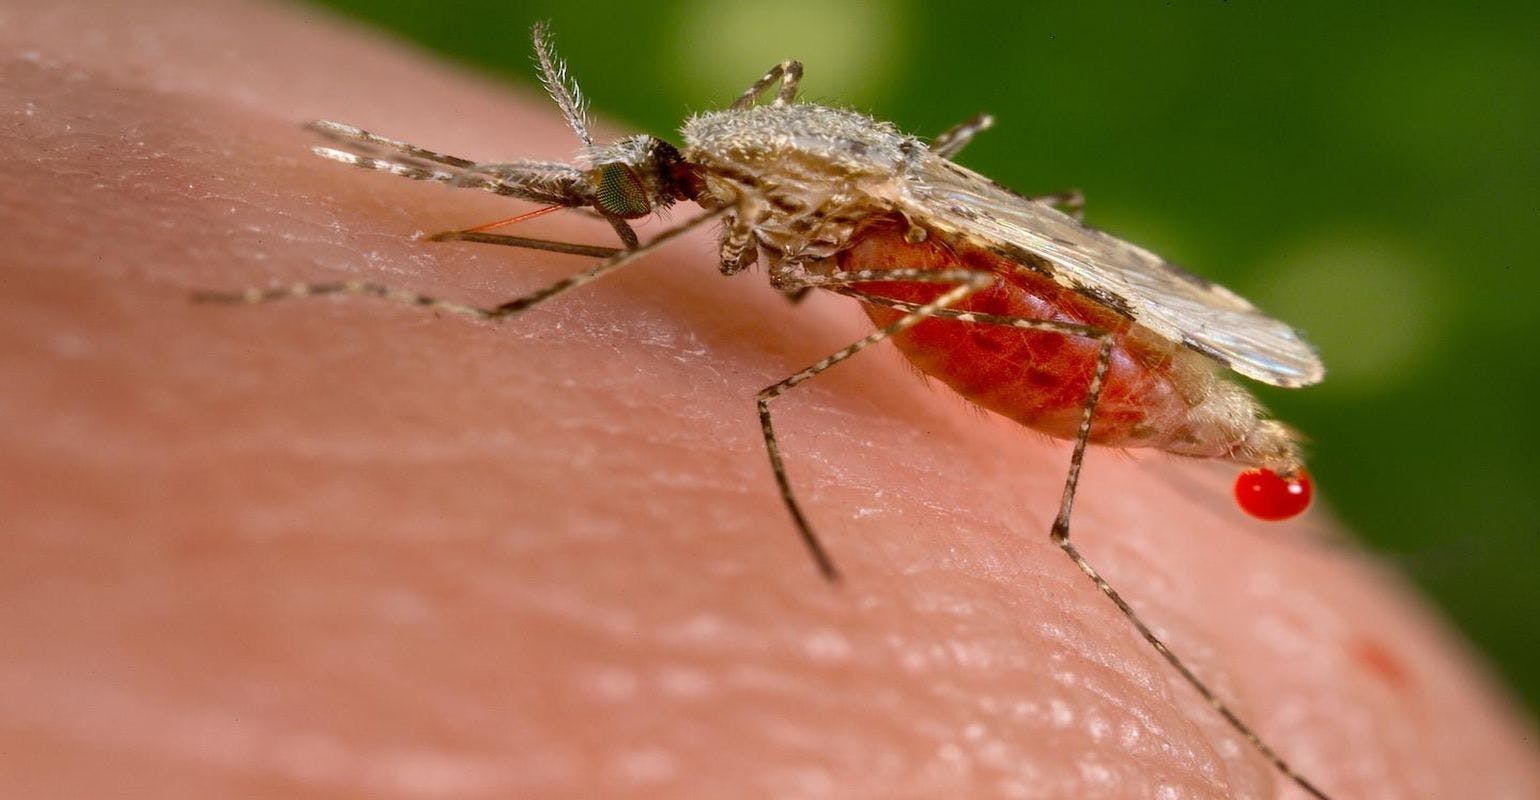 Controlling Deadly Malaria Without Chemicals